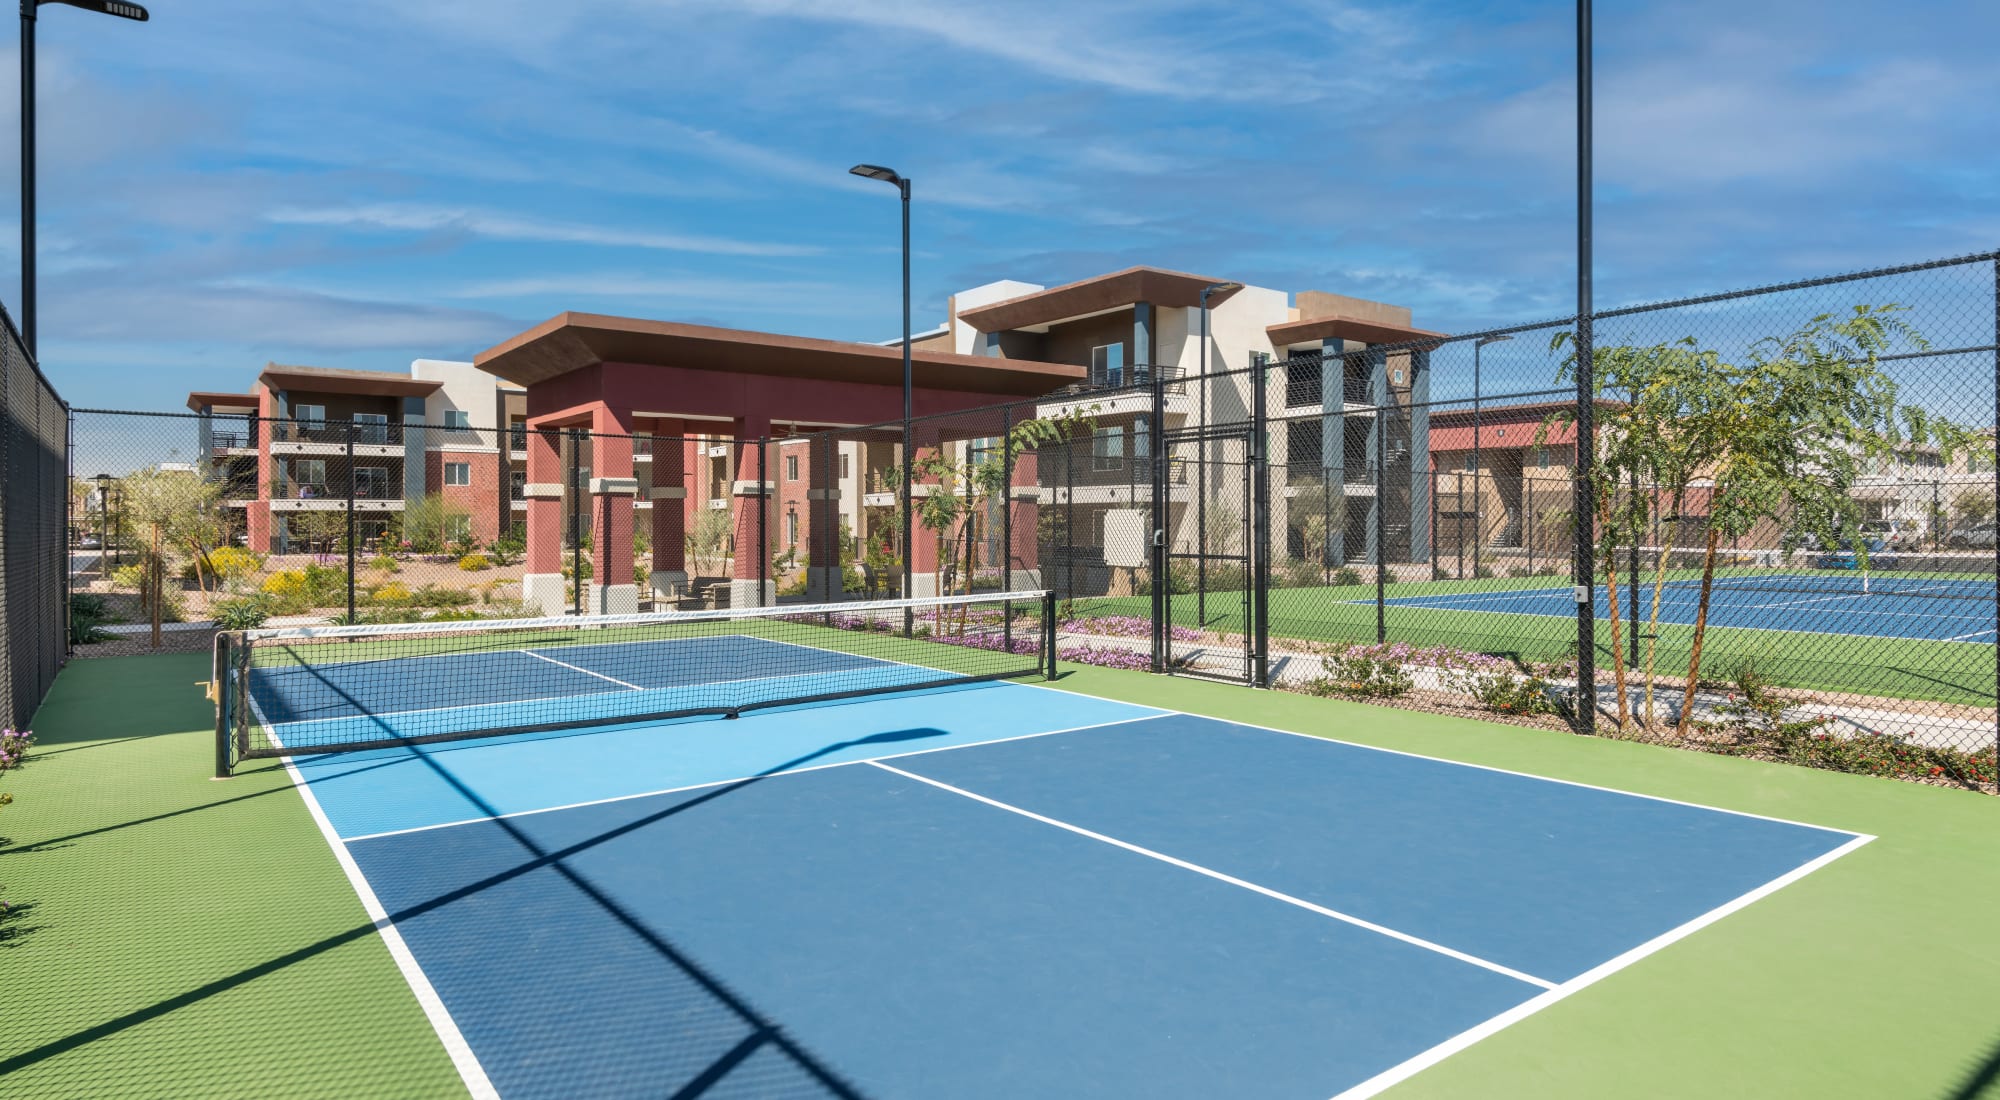 Tennis court at The Crossing at Cooley Station in Gilbert, Arizona